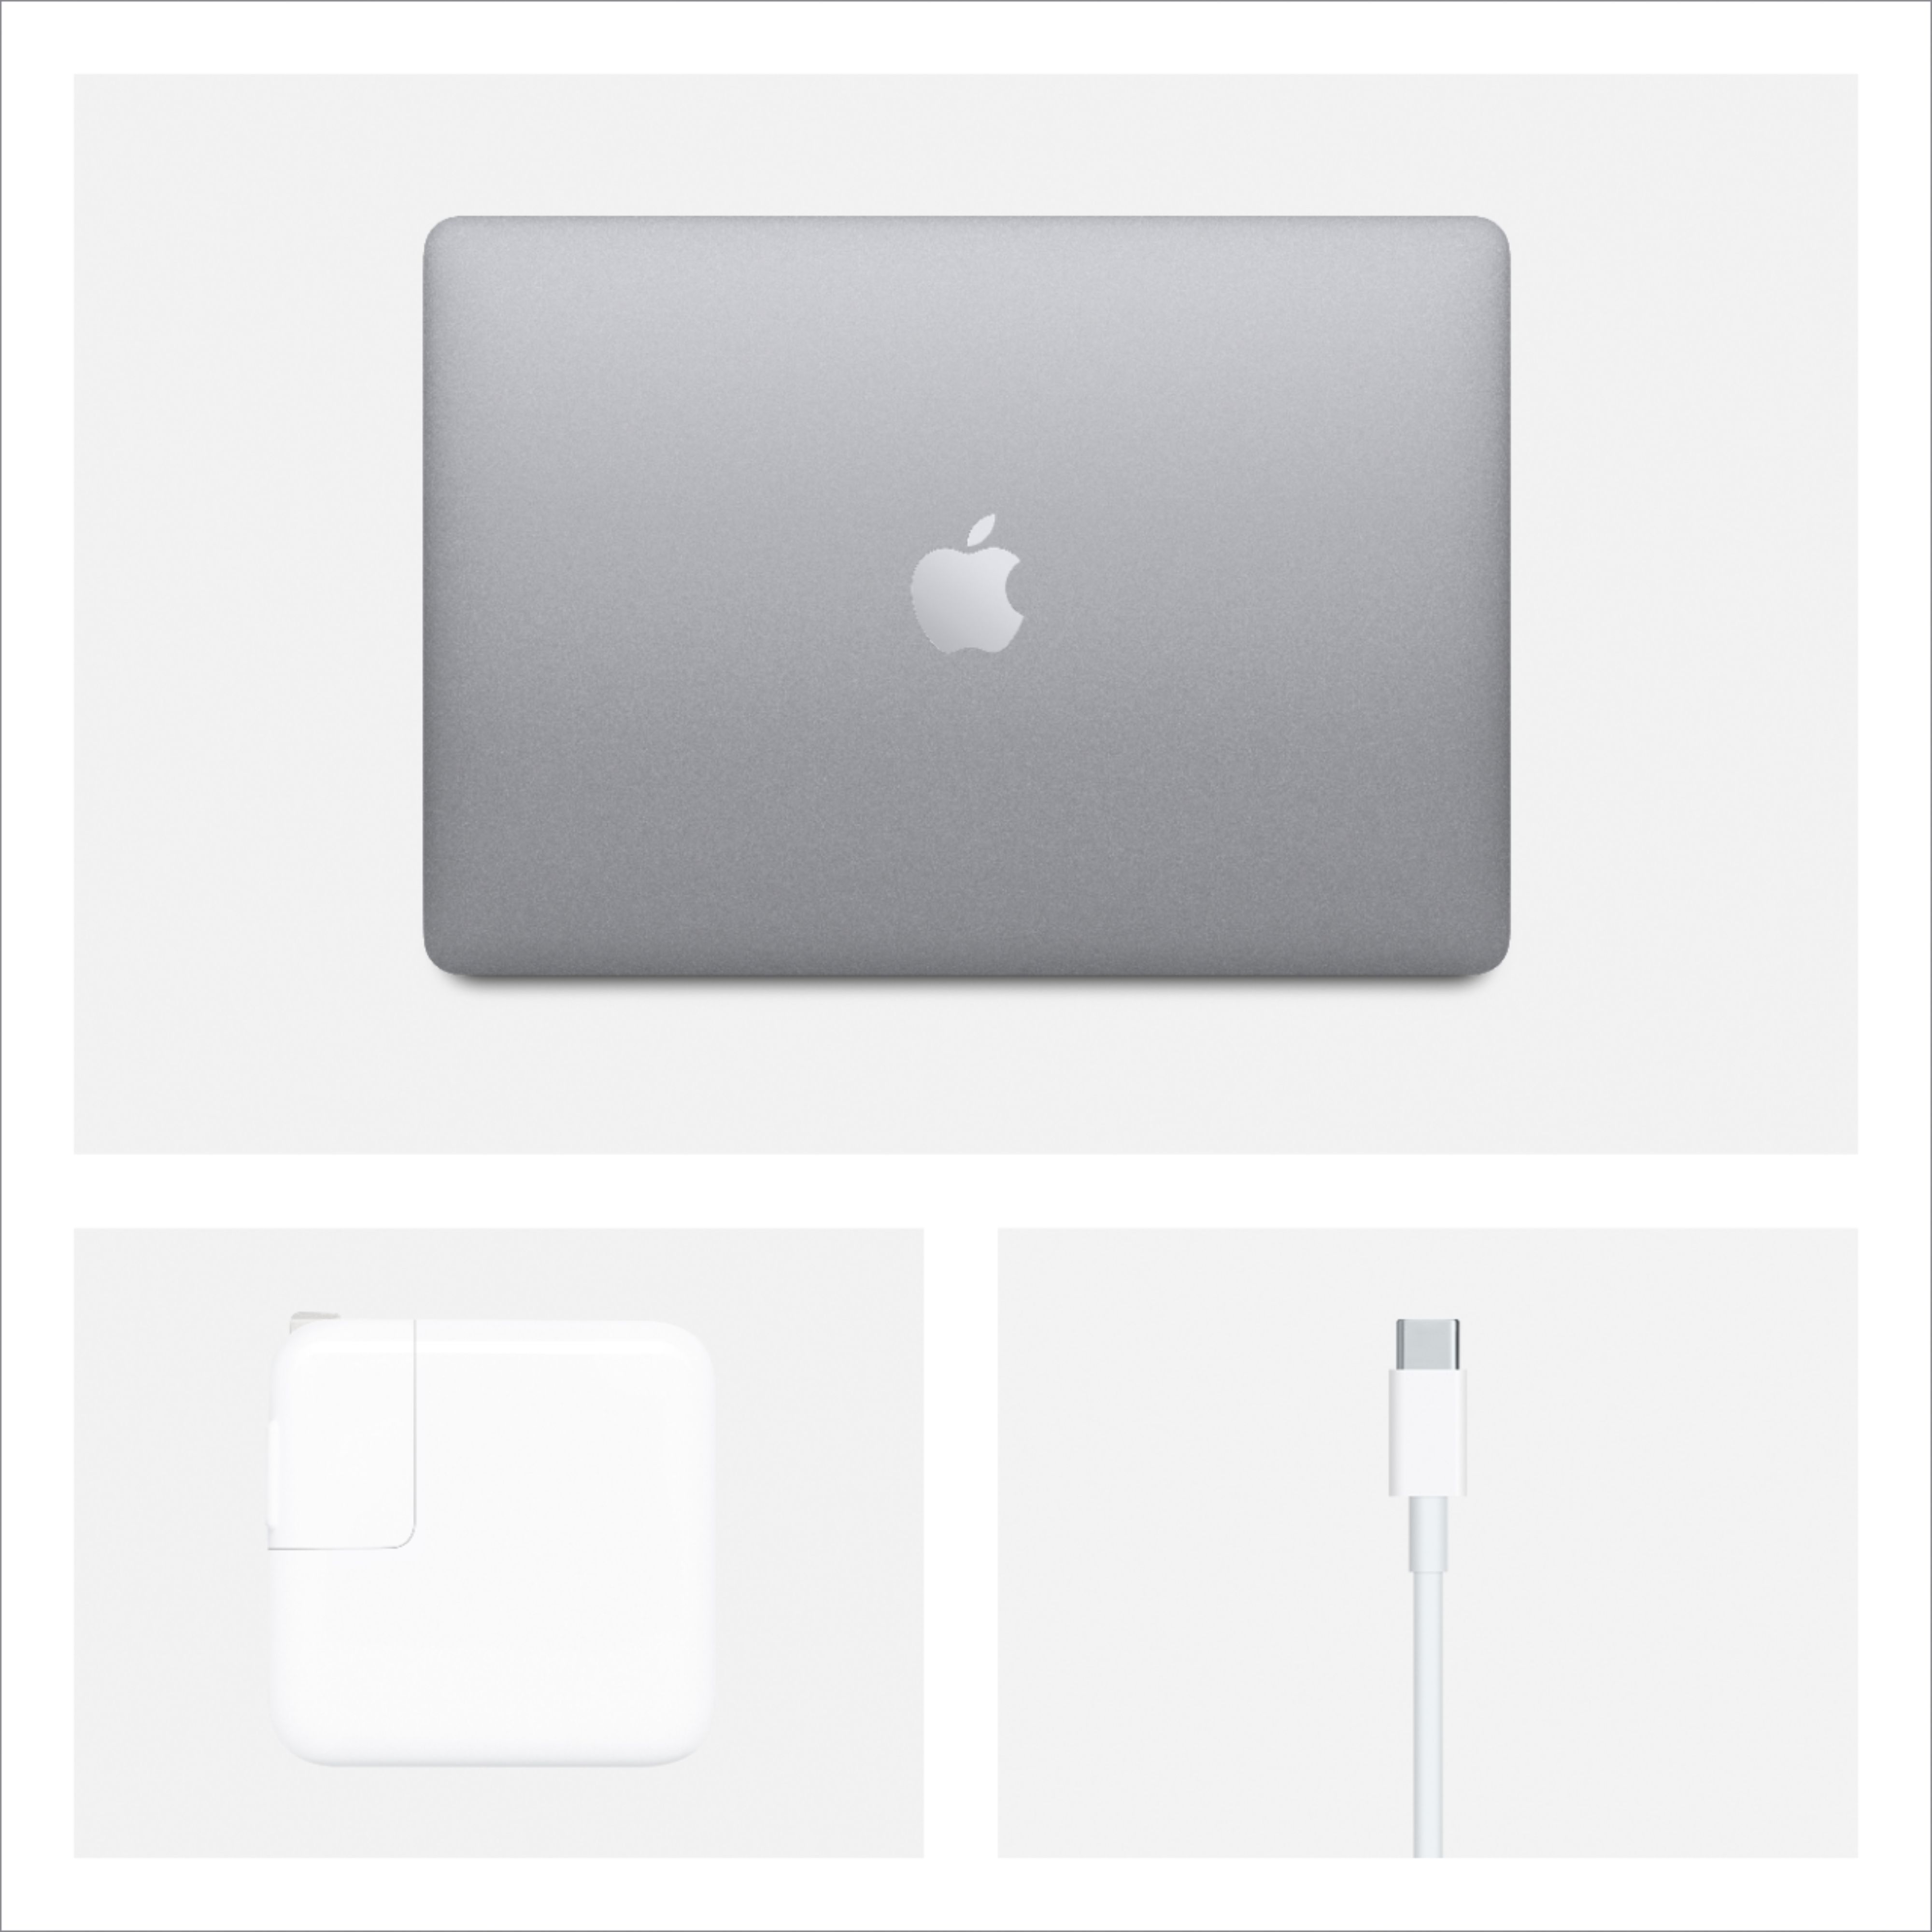 Apple Macbook Air 13 3 Laptop With Touch Id Intel Core I3 8gb Memory 256gb Solid State Drive Space Gray Mwtj2ll A Best Buy